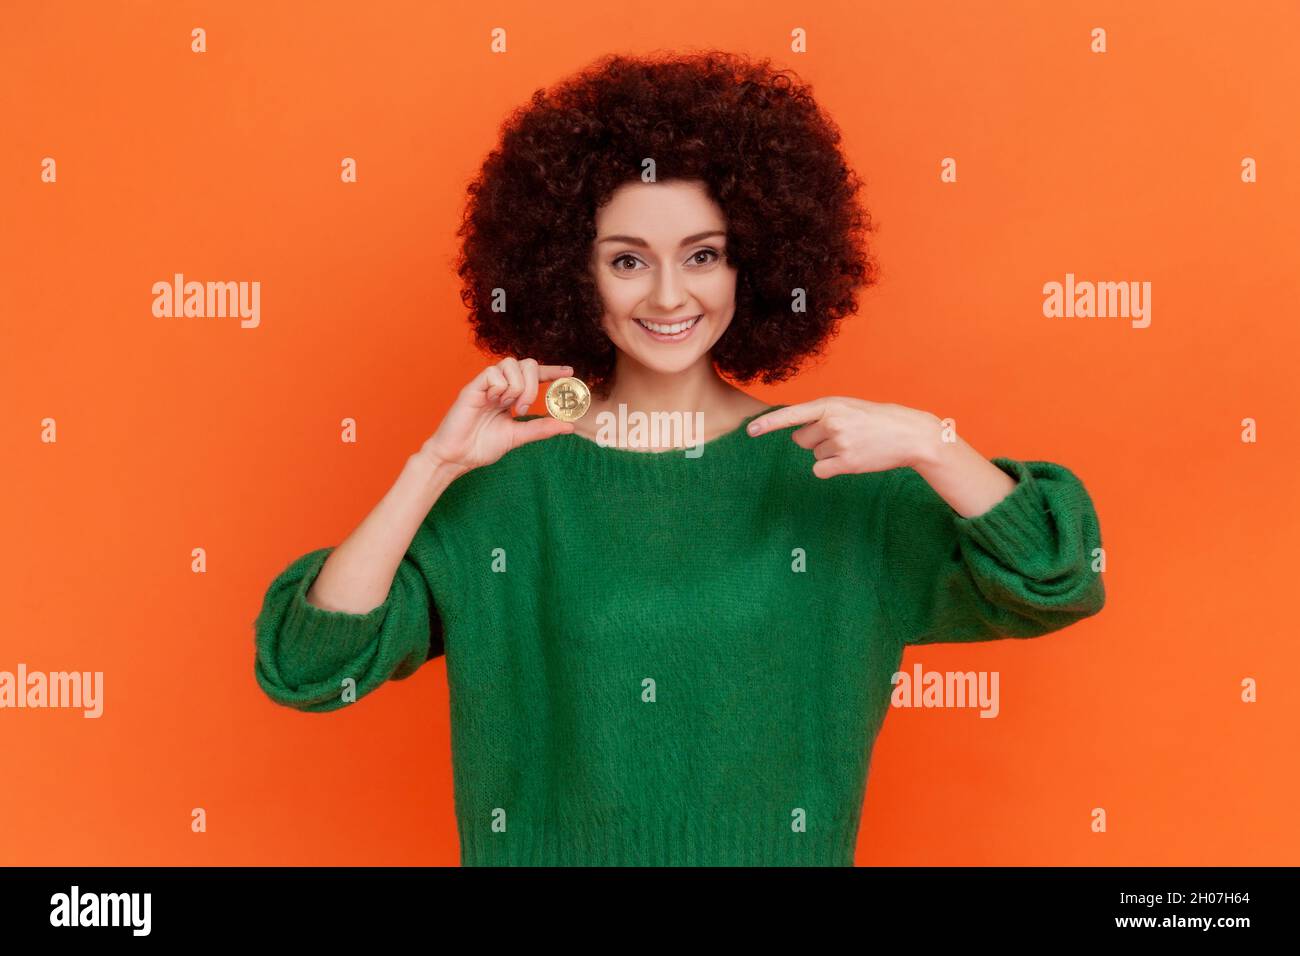 Portrait of pleasant looking woman with Afro hairstyle wearing green casual style sweater pointing finger at gold bitcoin, ecommerce. Indoor studio shot isolated on orange background. Stock Photo